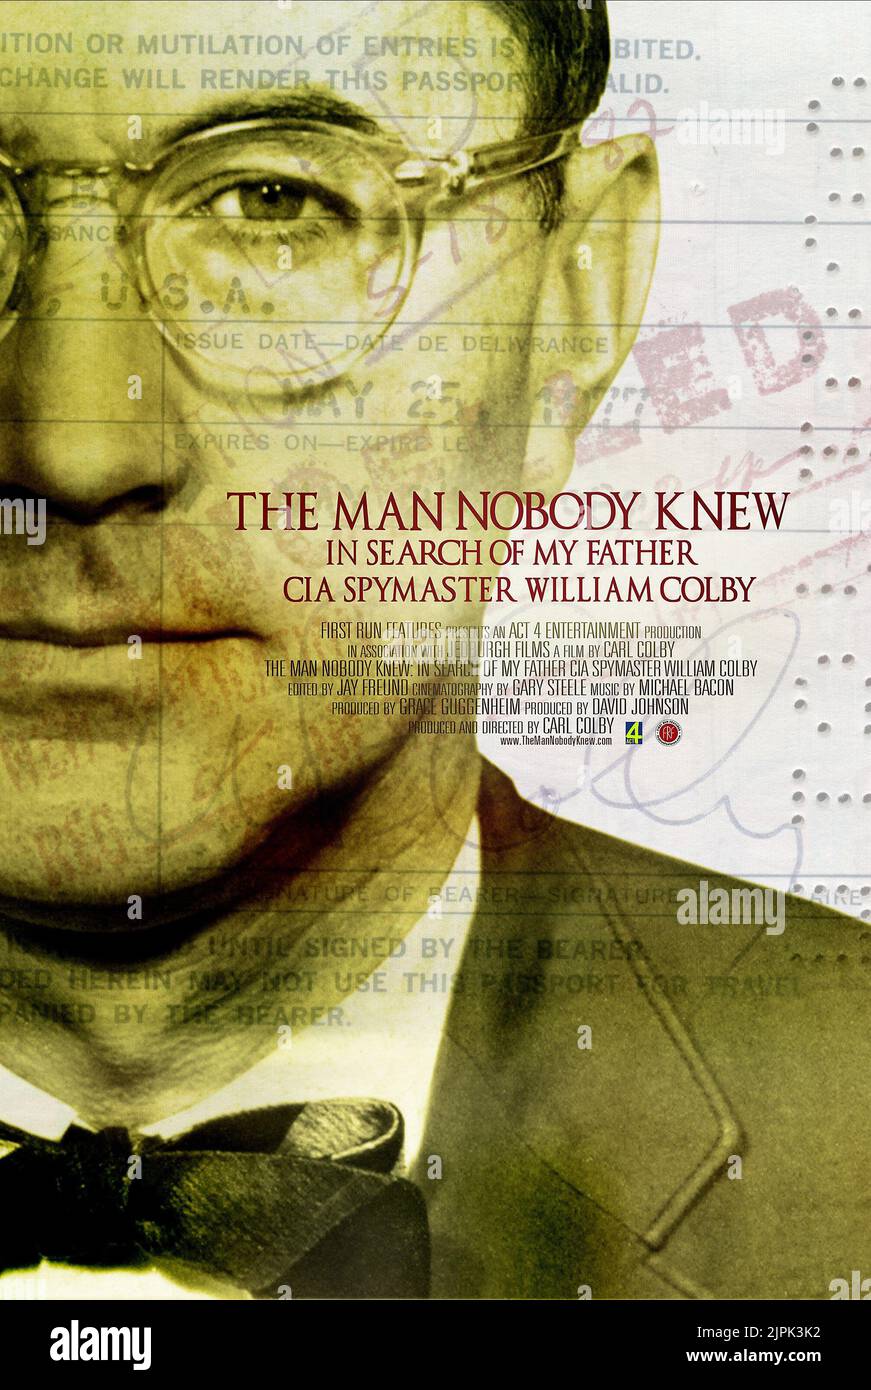 MOVIE POSTER, THE MAN NOBODY KNEW: IN SEARCH OF MY FATHER  CIA SPYMASTER WILLIAM COLBY, 2011 Stock Photo